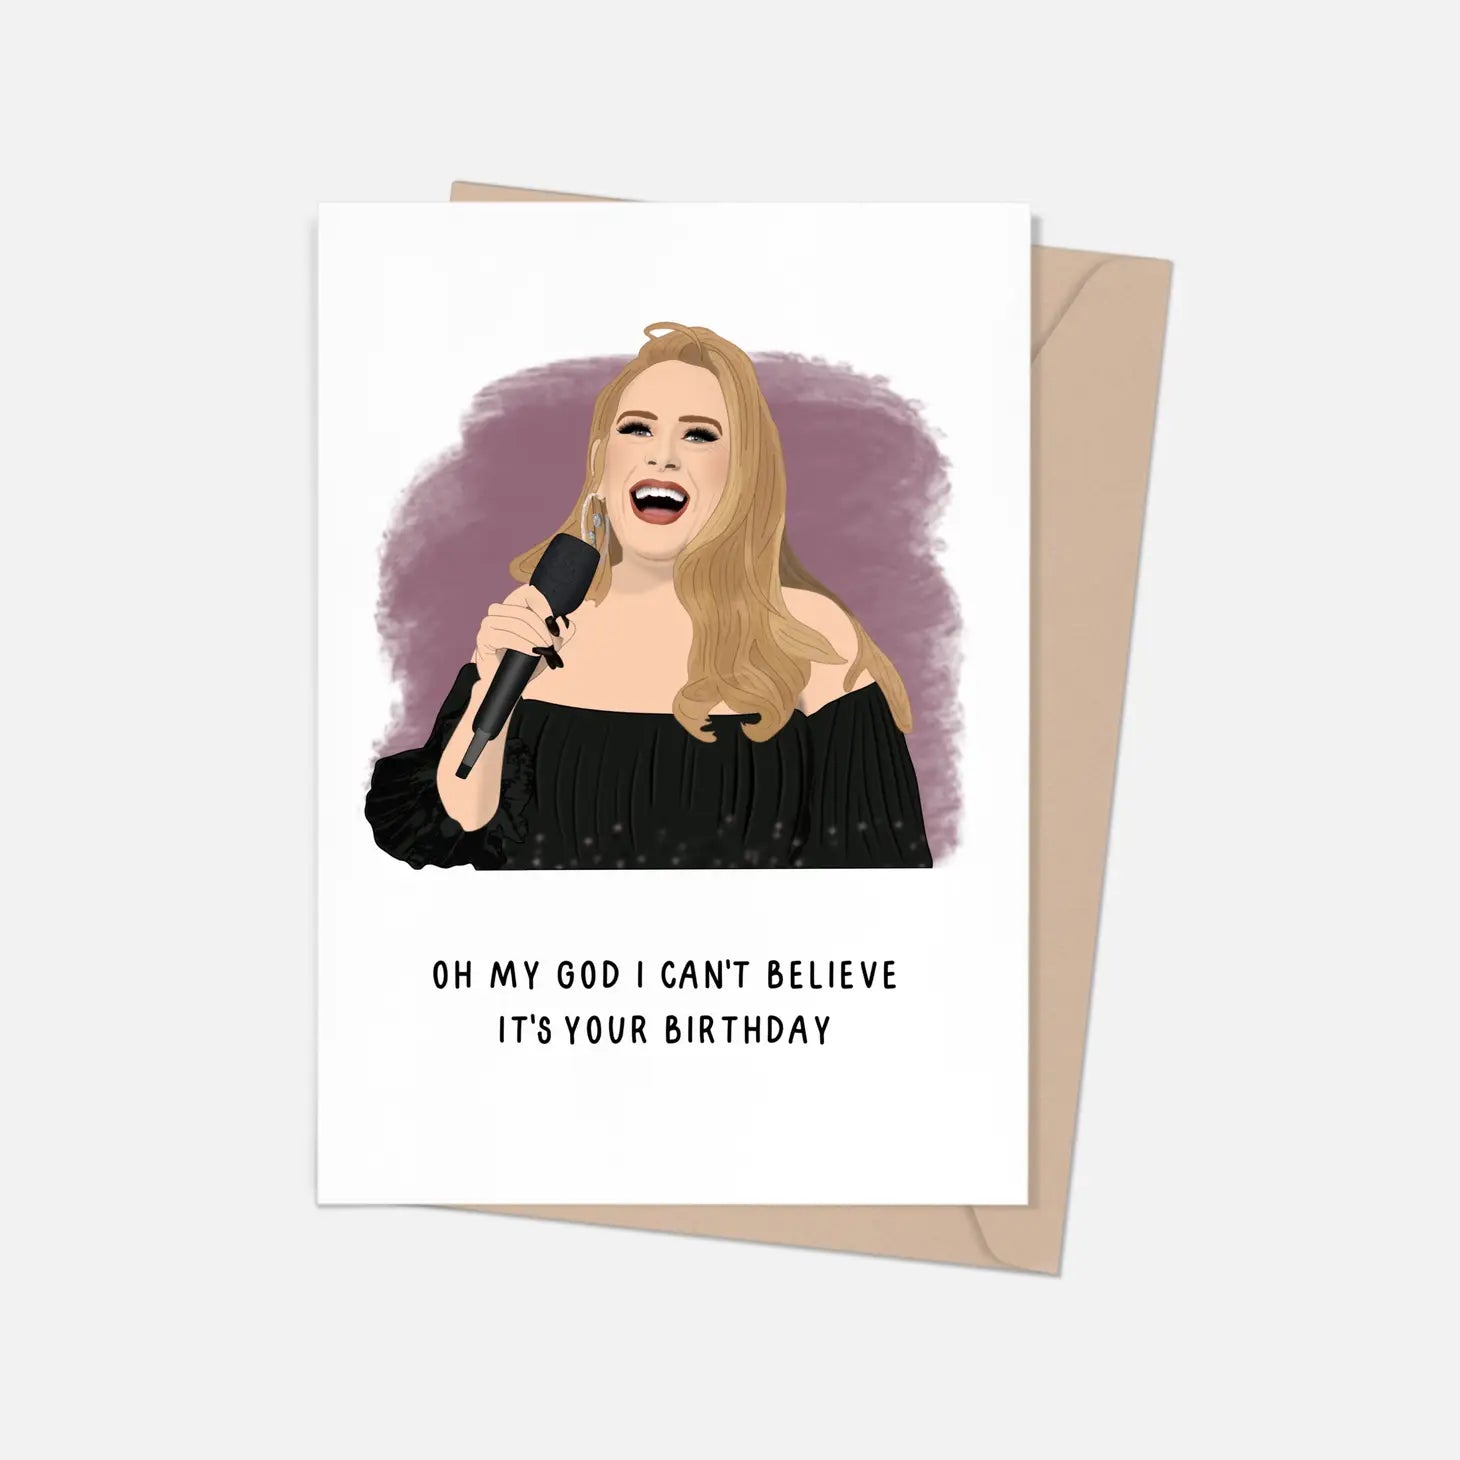 ADELE OMG IT'S YOUR BIRTHDAY CARD